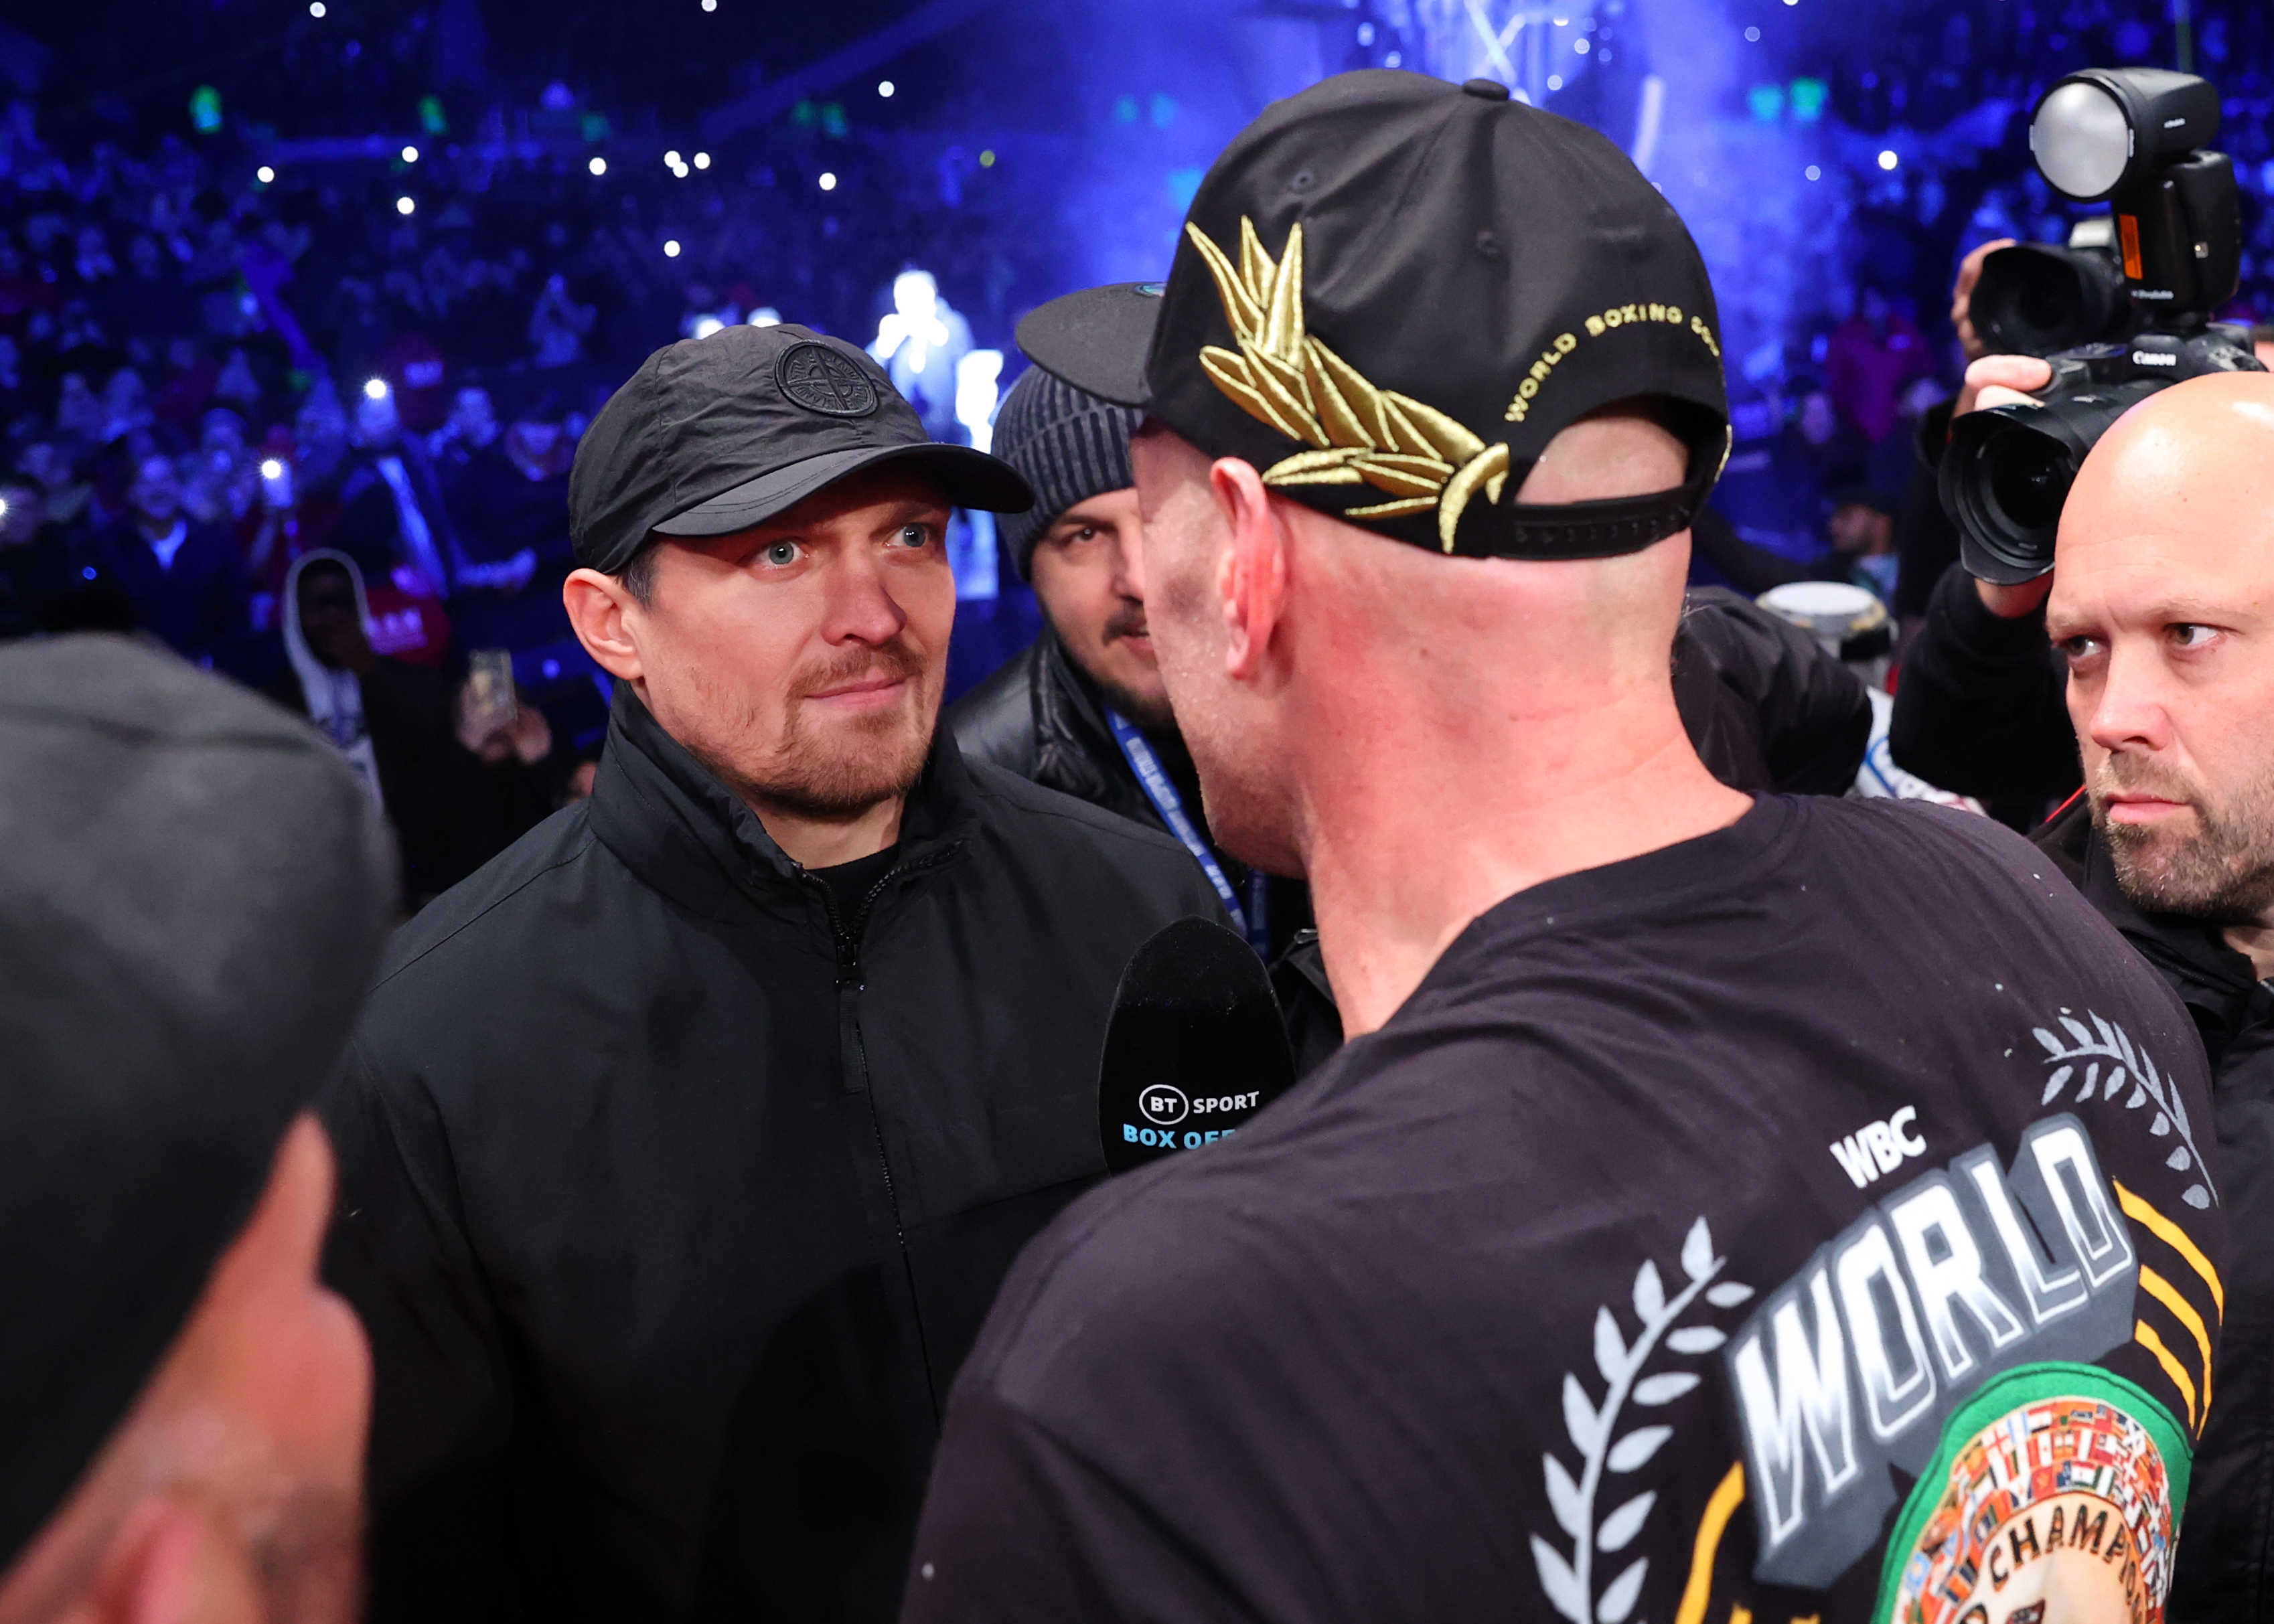 Will we get Fury vs Usyk in 2023? We all hope so!